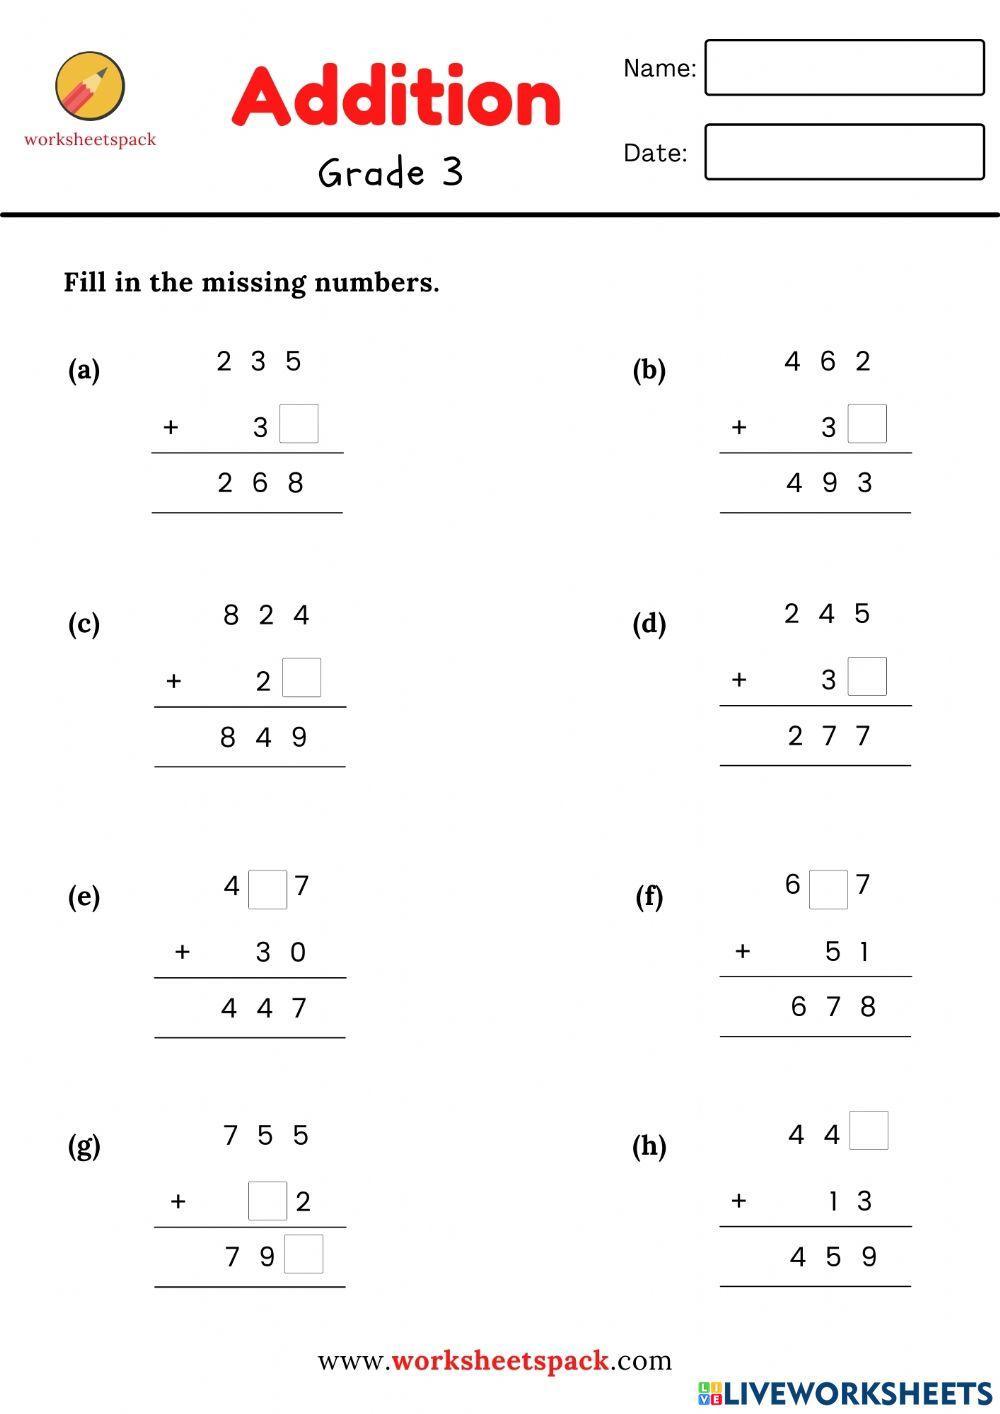 Addition fill in the missing numbers